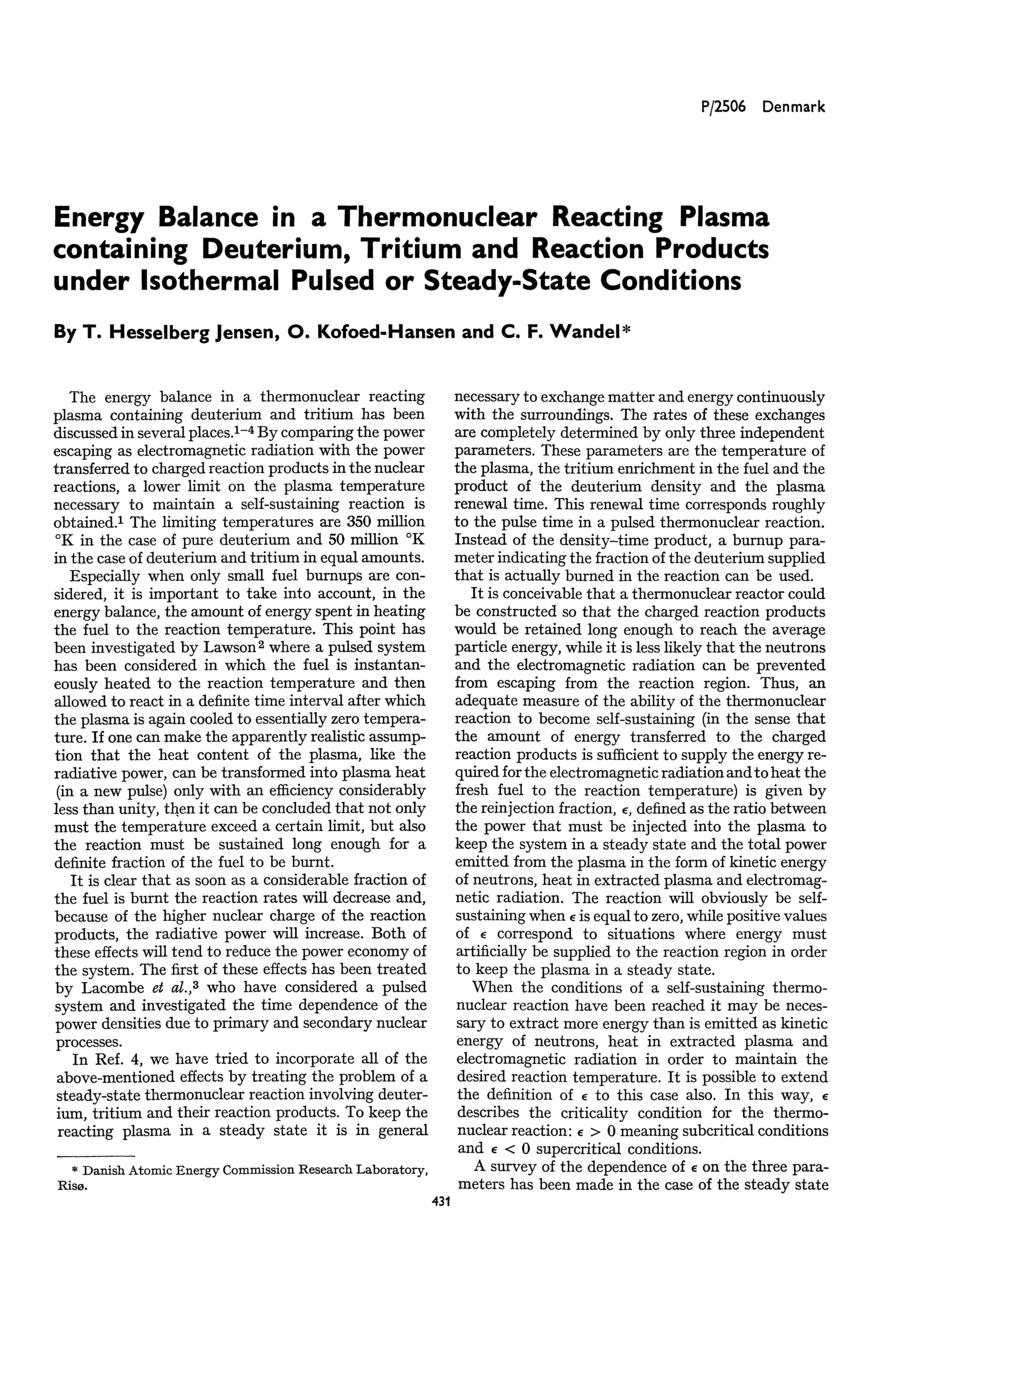 P/2506 Denmark Energy Balance in a Thermonuclear Reacting Plasma containing Deuterium, Tritium and Reaction Products under Isothermal Pulsed or Steady-State Conditions By T. Hesselberg Jensen, O.